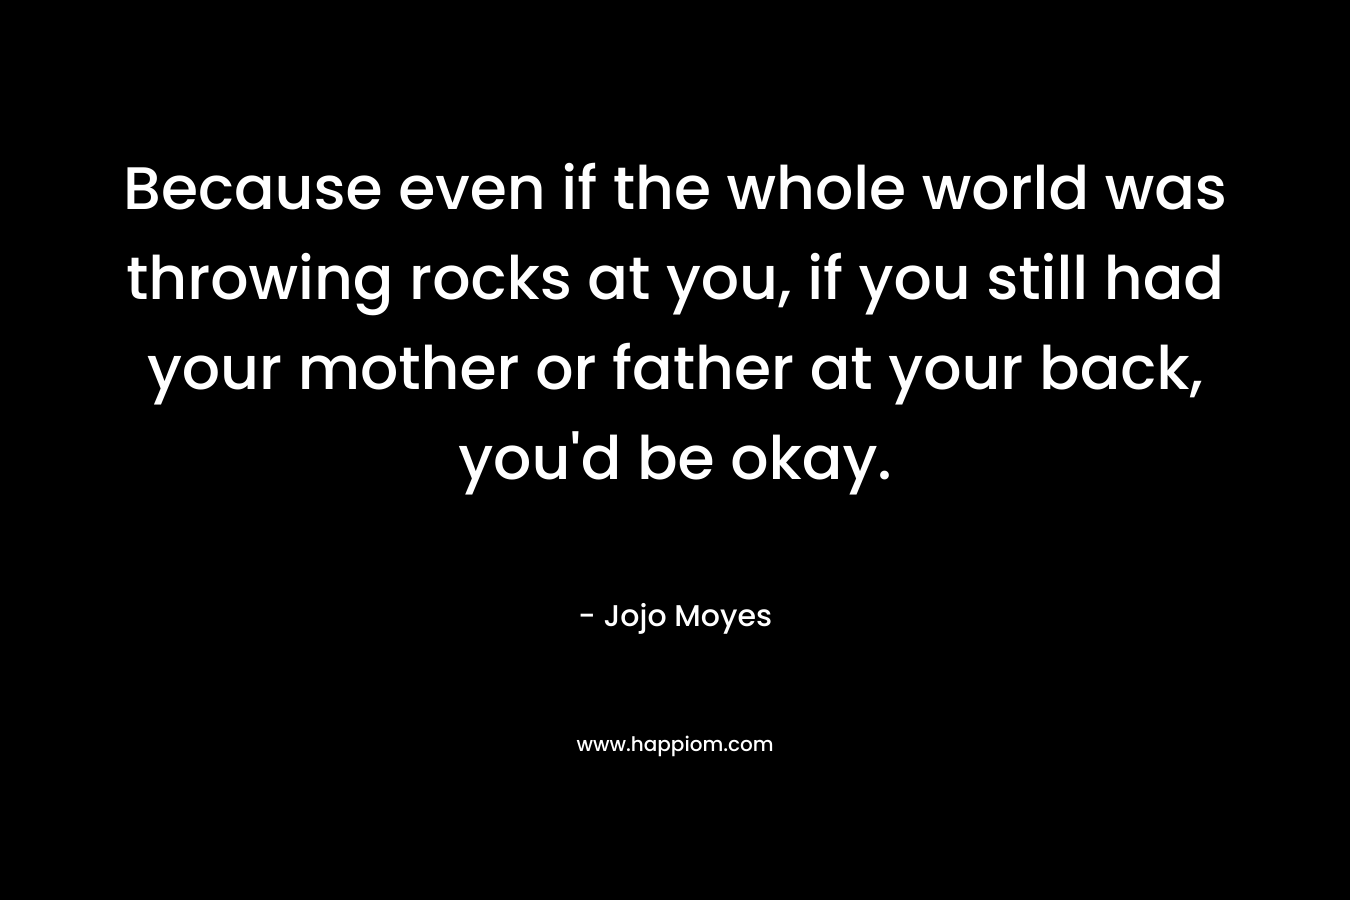 Because even if the whole world was throwing rocks at you, if you still had your mother or father at your back, you’d be okay. – Jojo Moyes